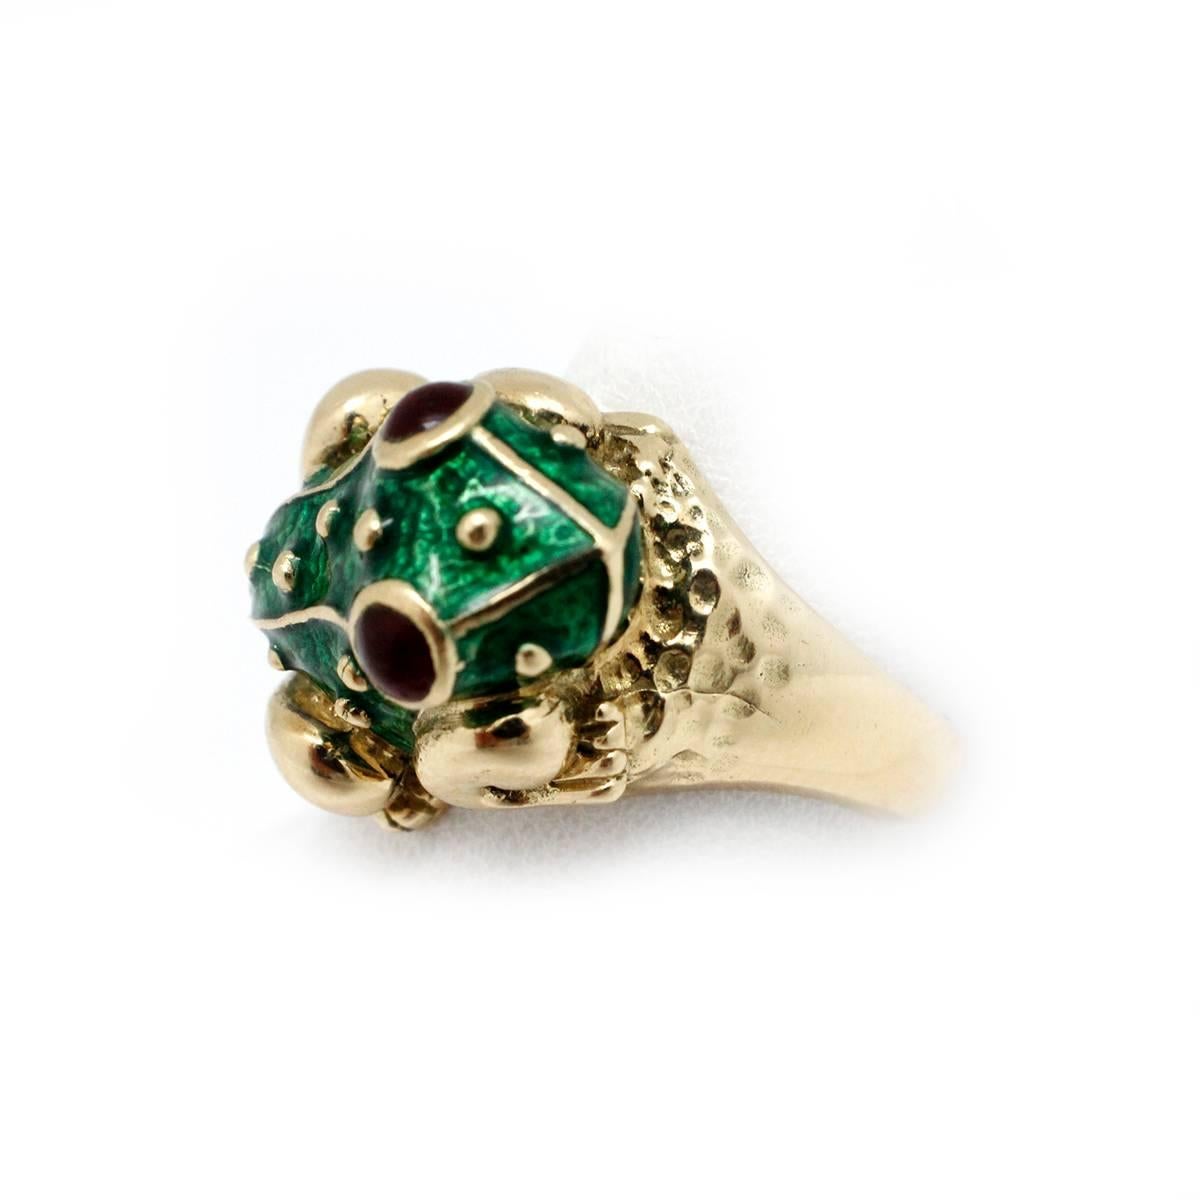 Contemporary Signed Hidalgo 18kt Gold Perfect Green Enamel Work & Ruby Eyes Huge Frog Ring!